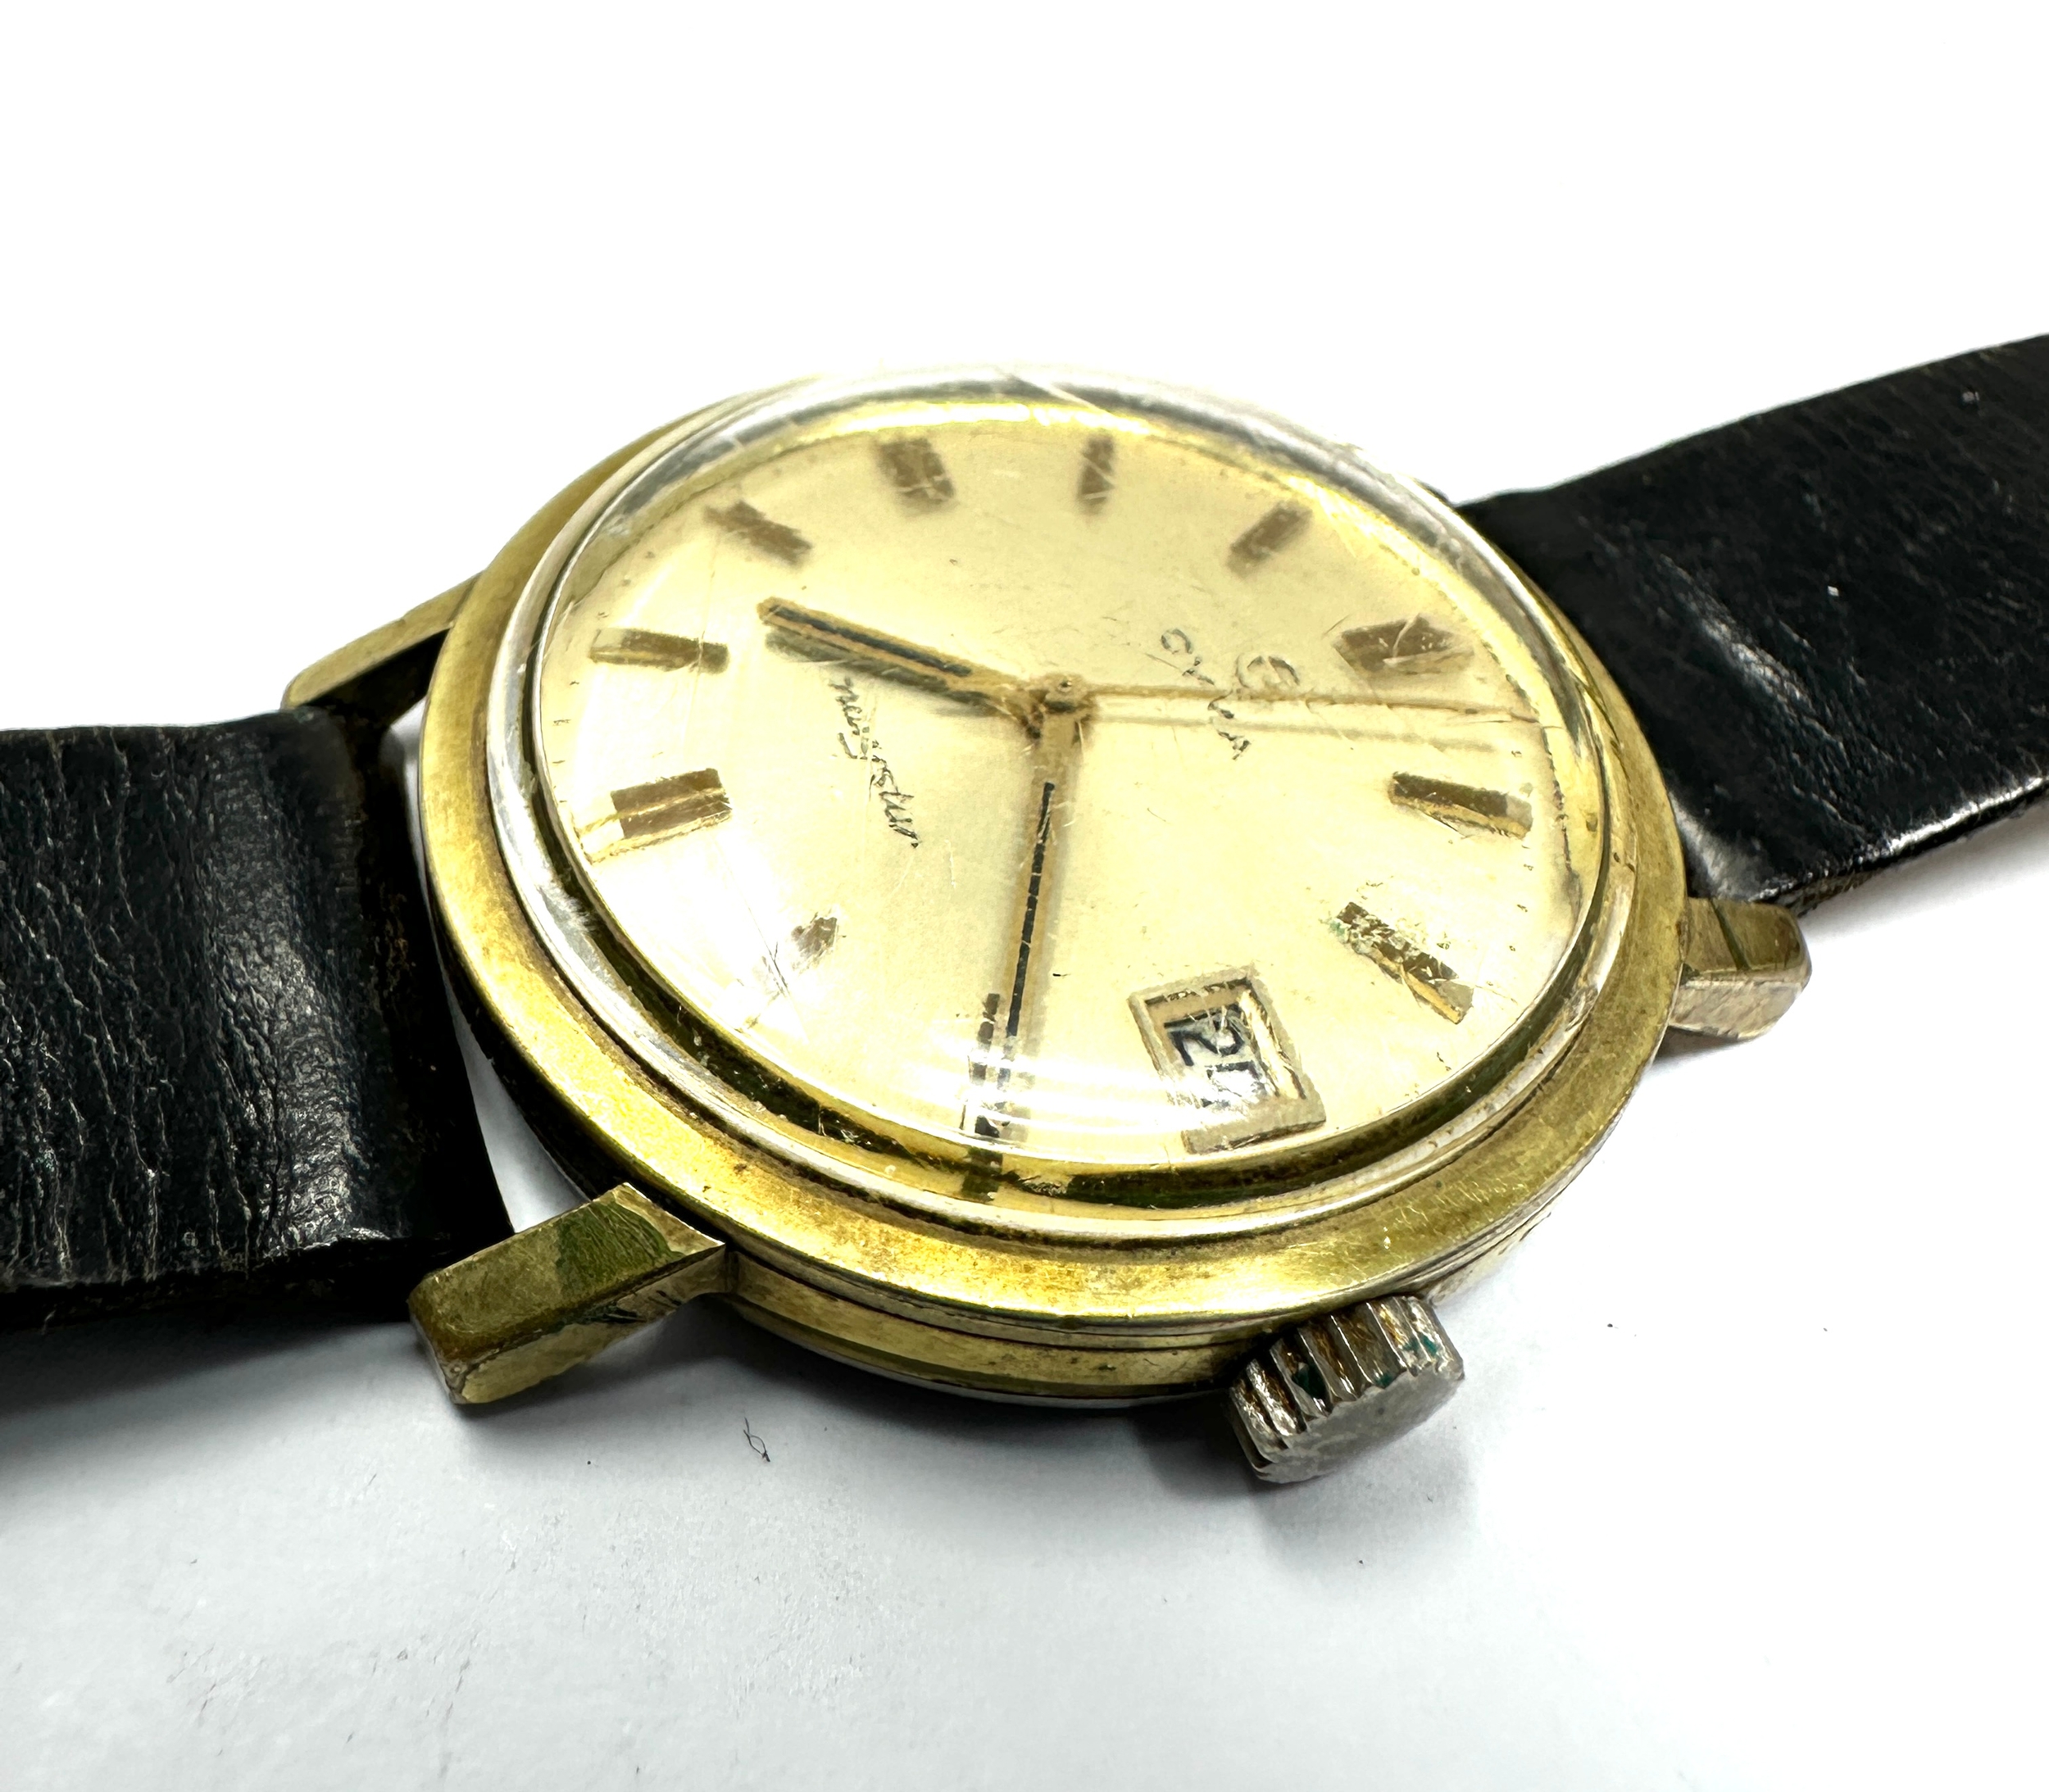 Vintage Cyma navystar gents wristwatch the watch is ticking - Image 2 of 4